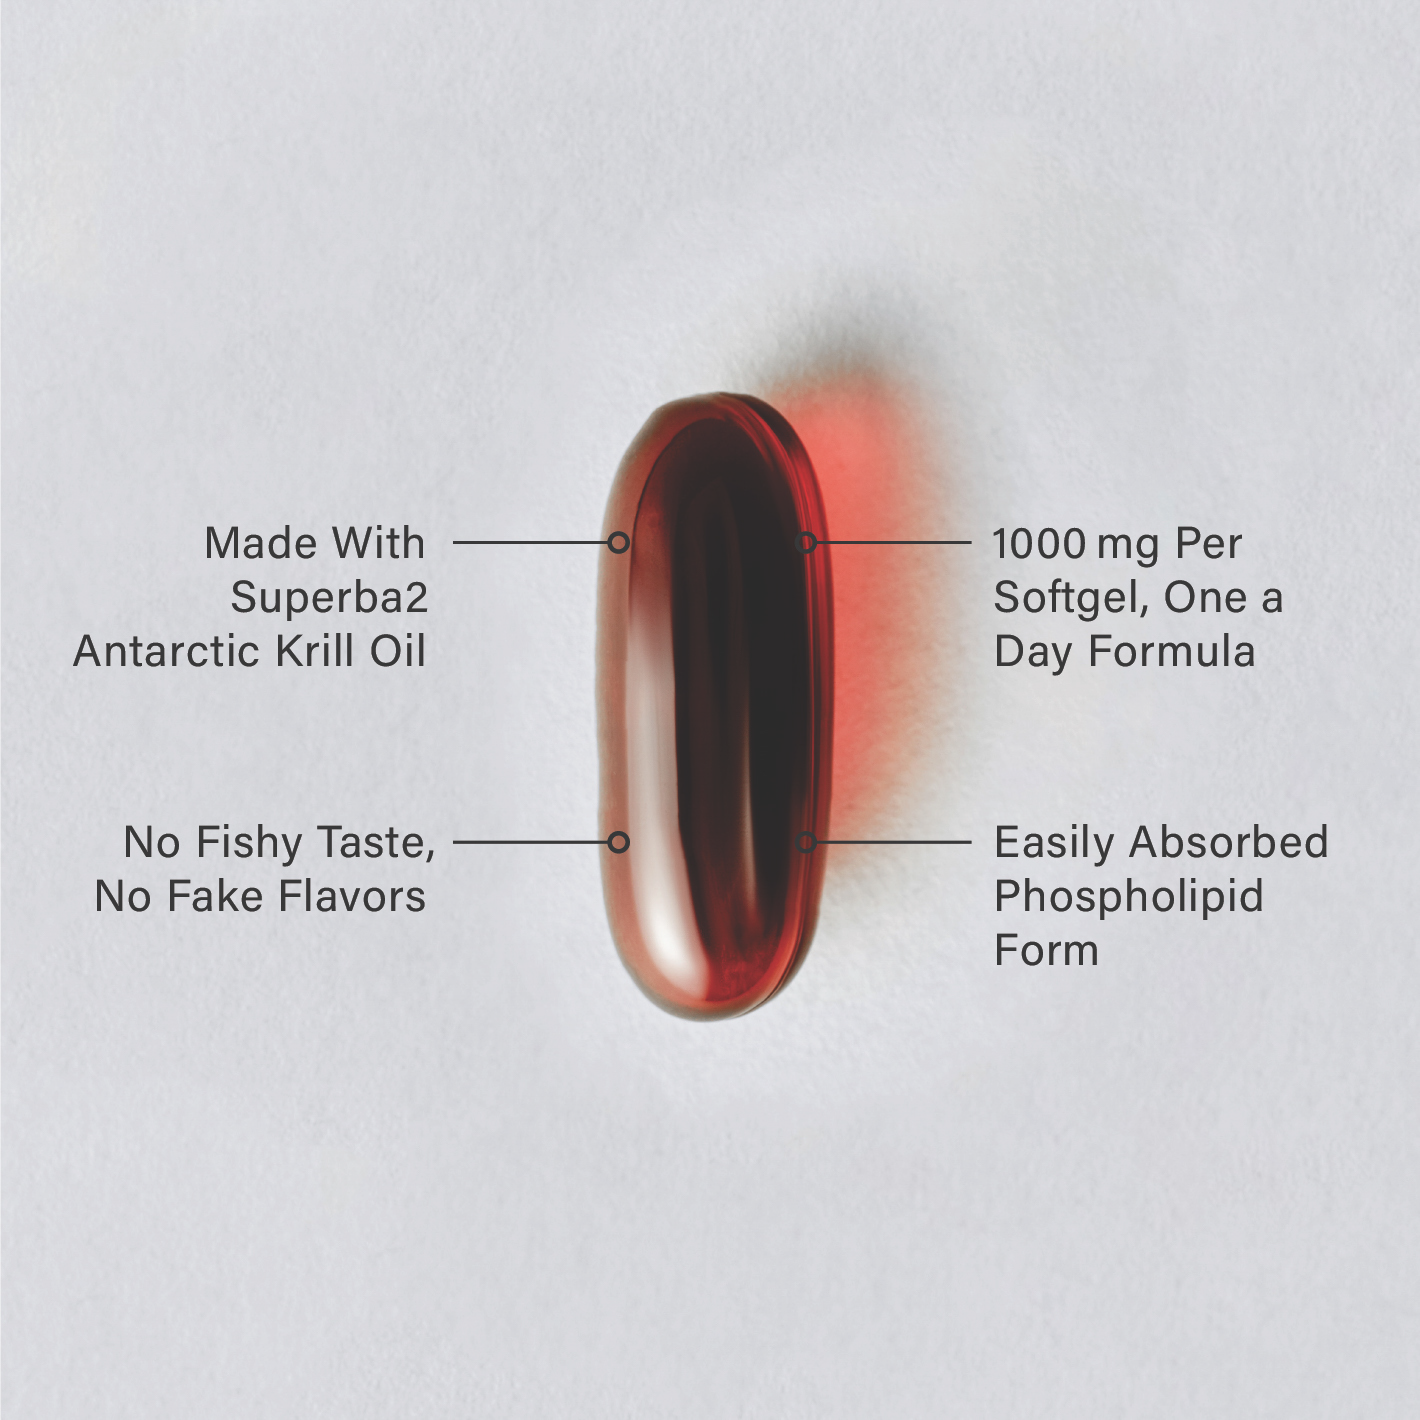 Single softgel Sports Research Antartic Krill Oil Superba2 infographic.